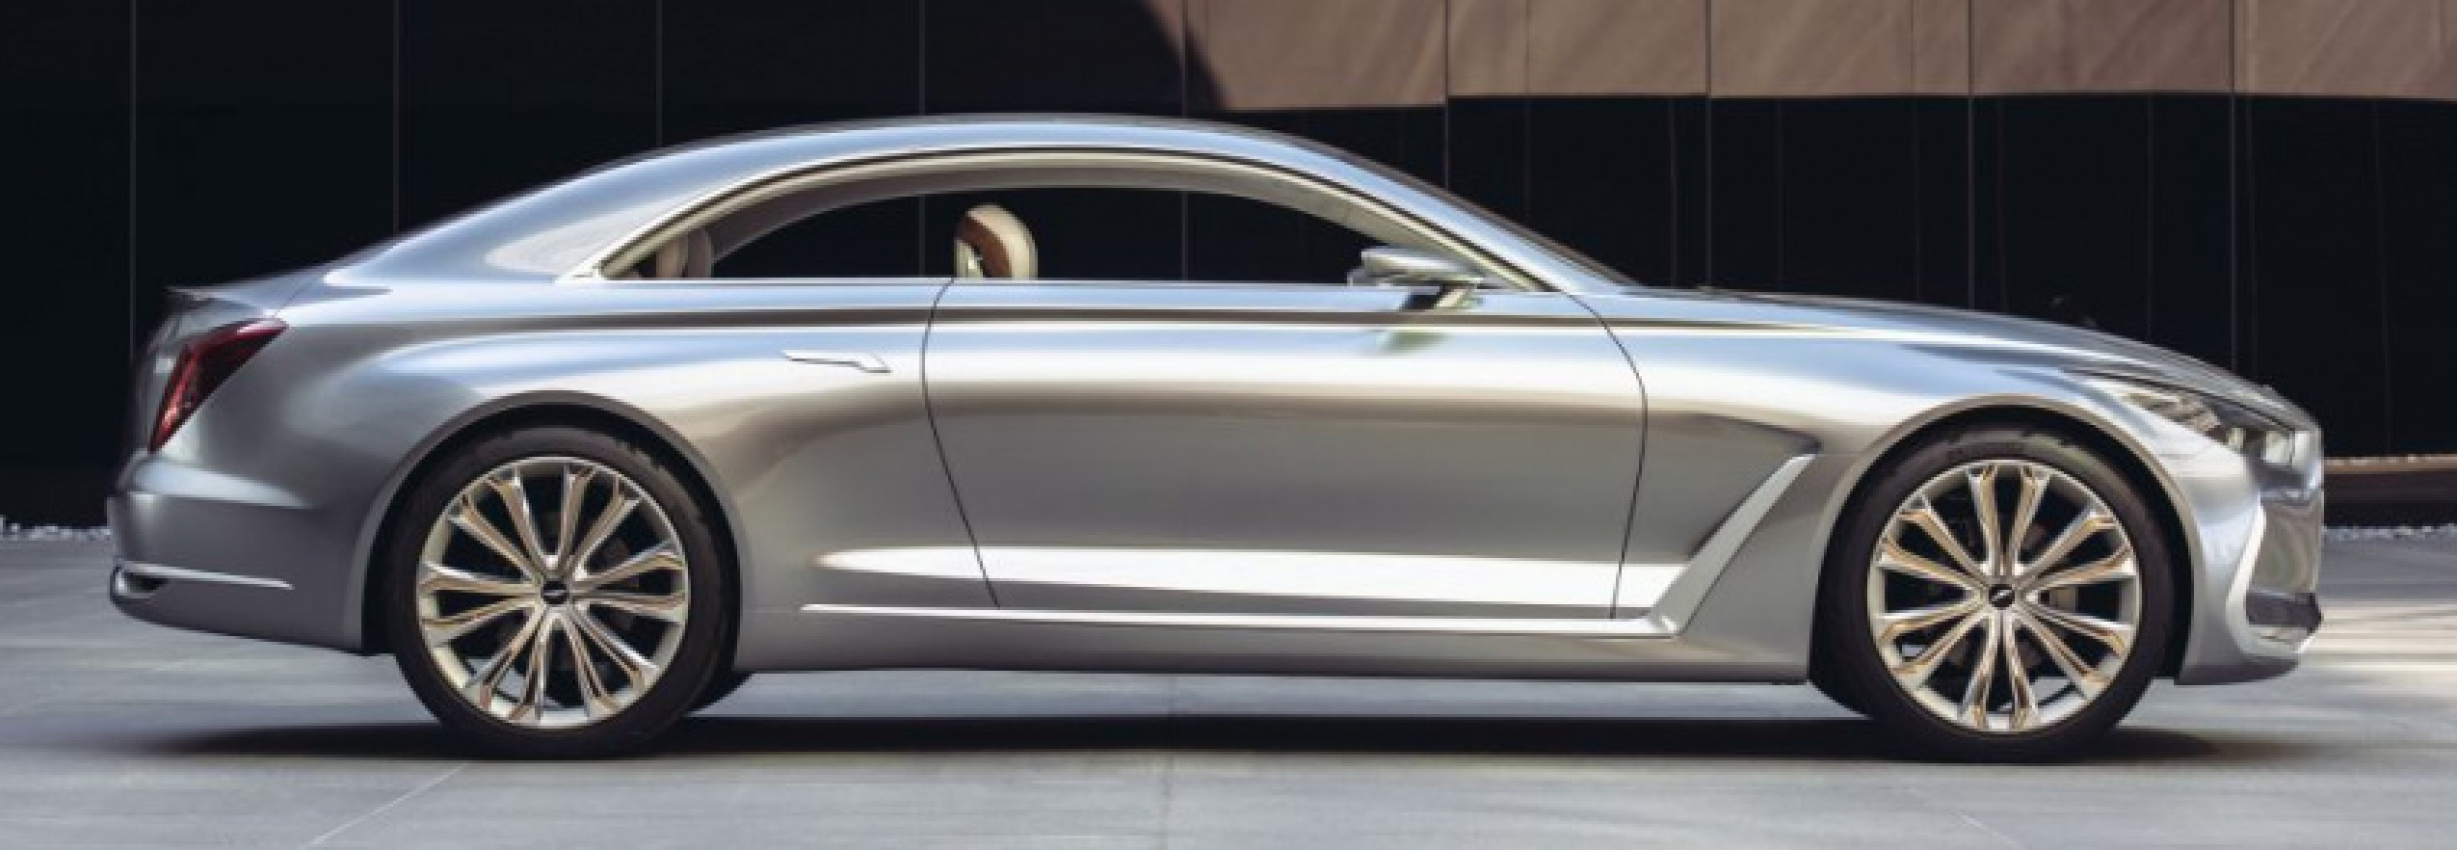 autos, cars, genesis, hyundai, first genesis luxury model looks set to be a hit with koreans